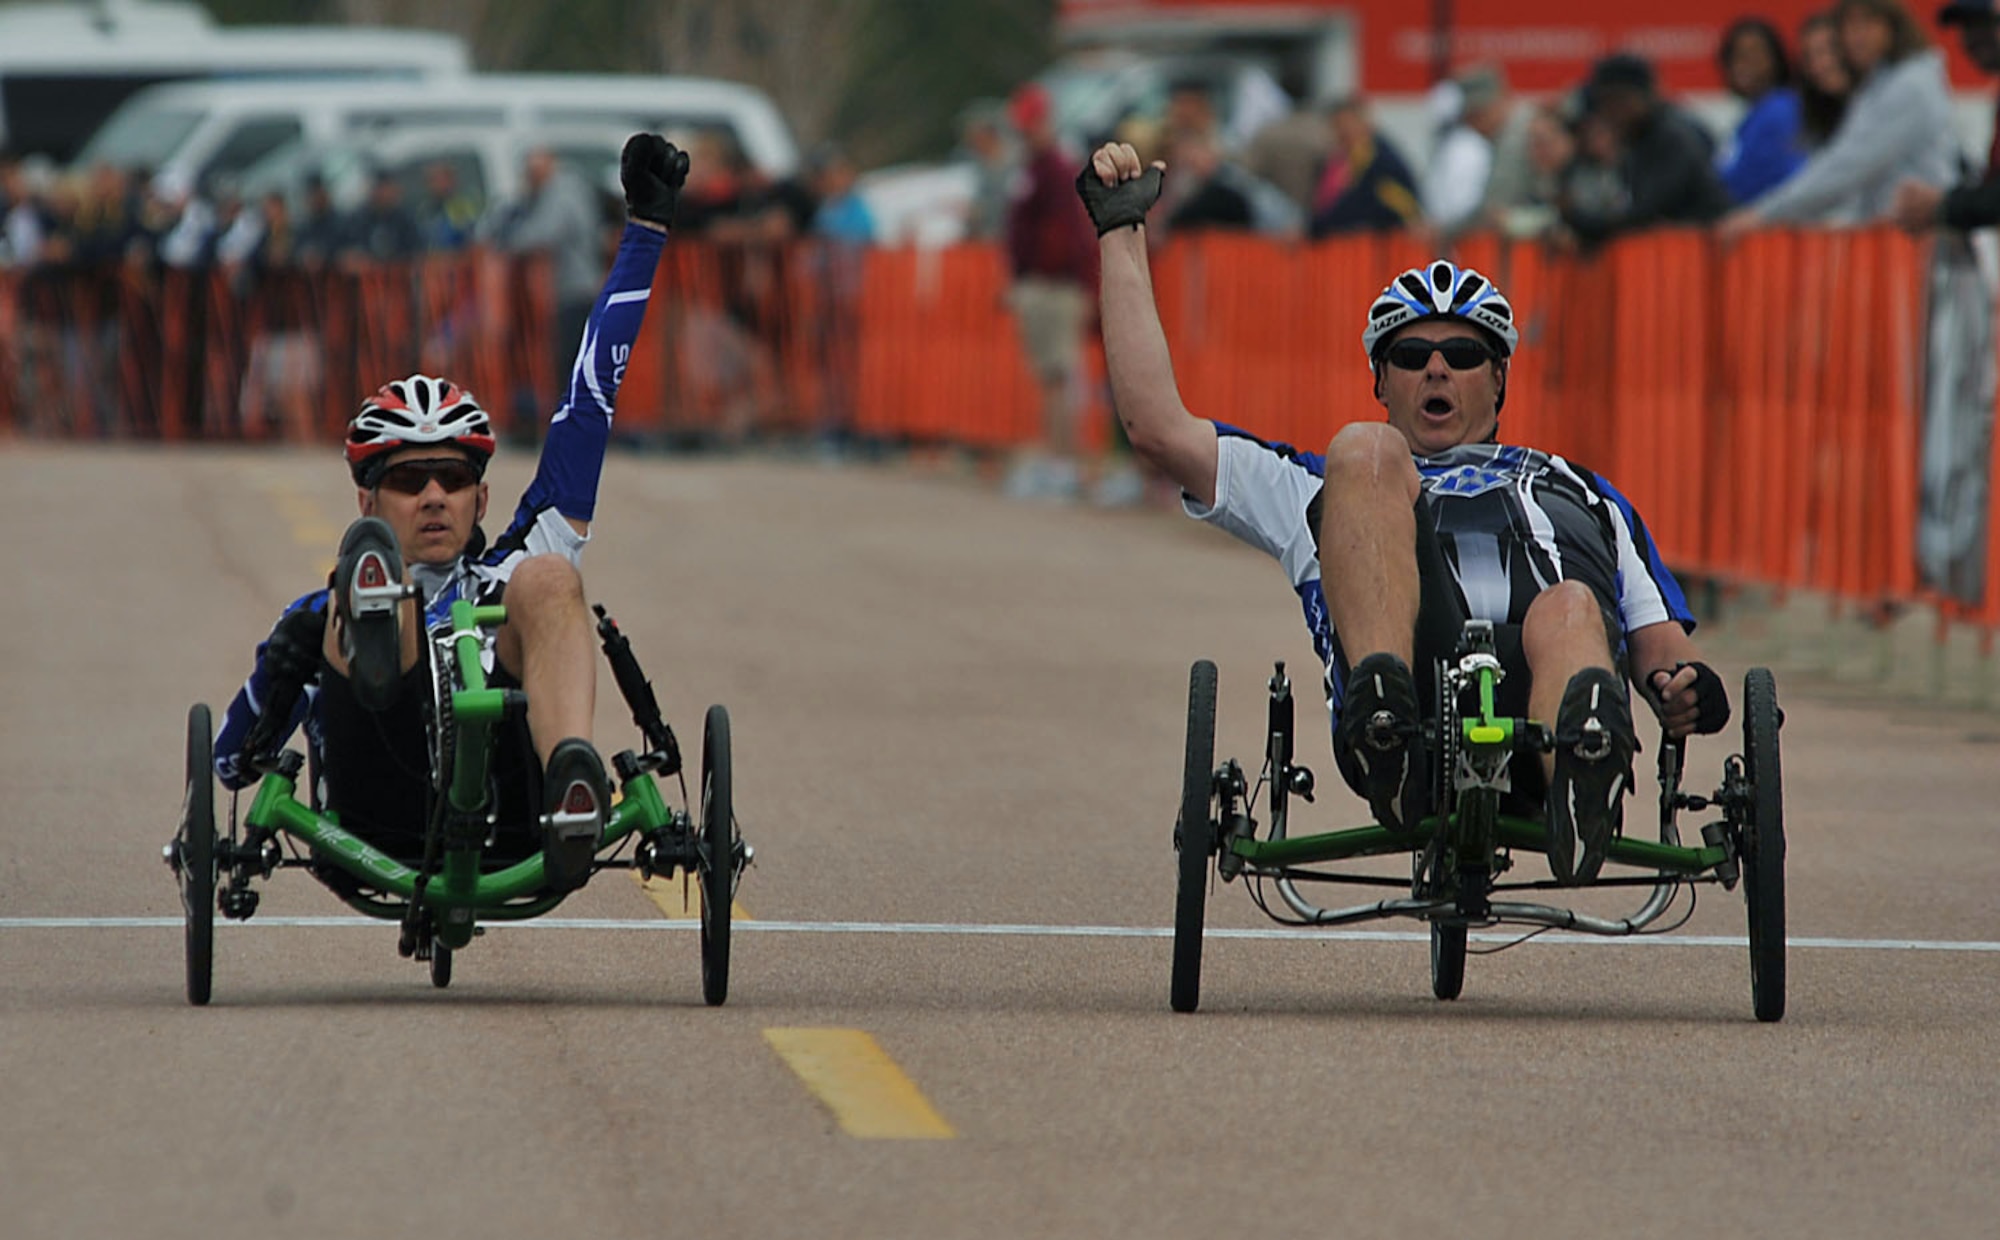 Senior Master Sgt. Mike Sanders (left) and Maj. Scott Bullis raise their hands as they cross the finish line during the recumbent cycling event of Warrior Games 2012 at the U.S. Air Force Academy in Colorado Springs, Colo., May 1, 2012. (U.S. Air Force photo/Val Gempis)